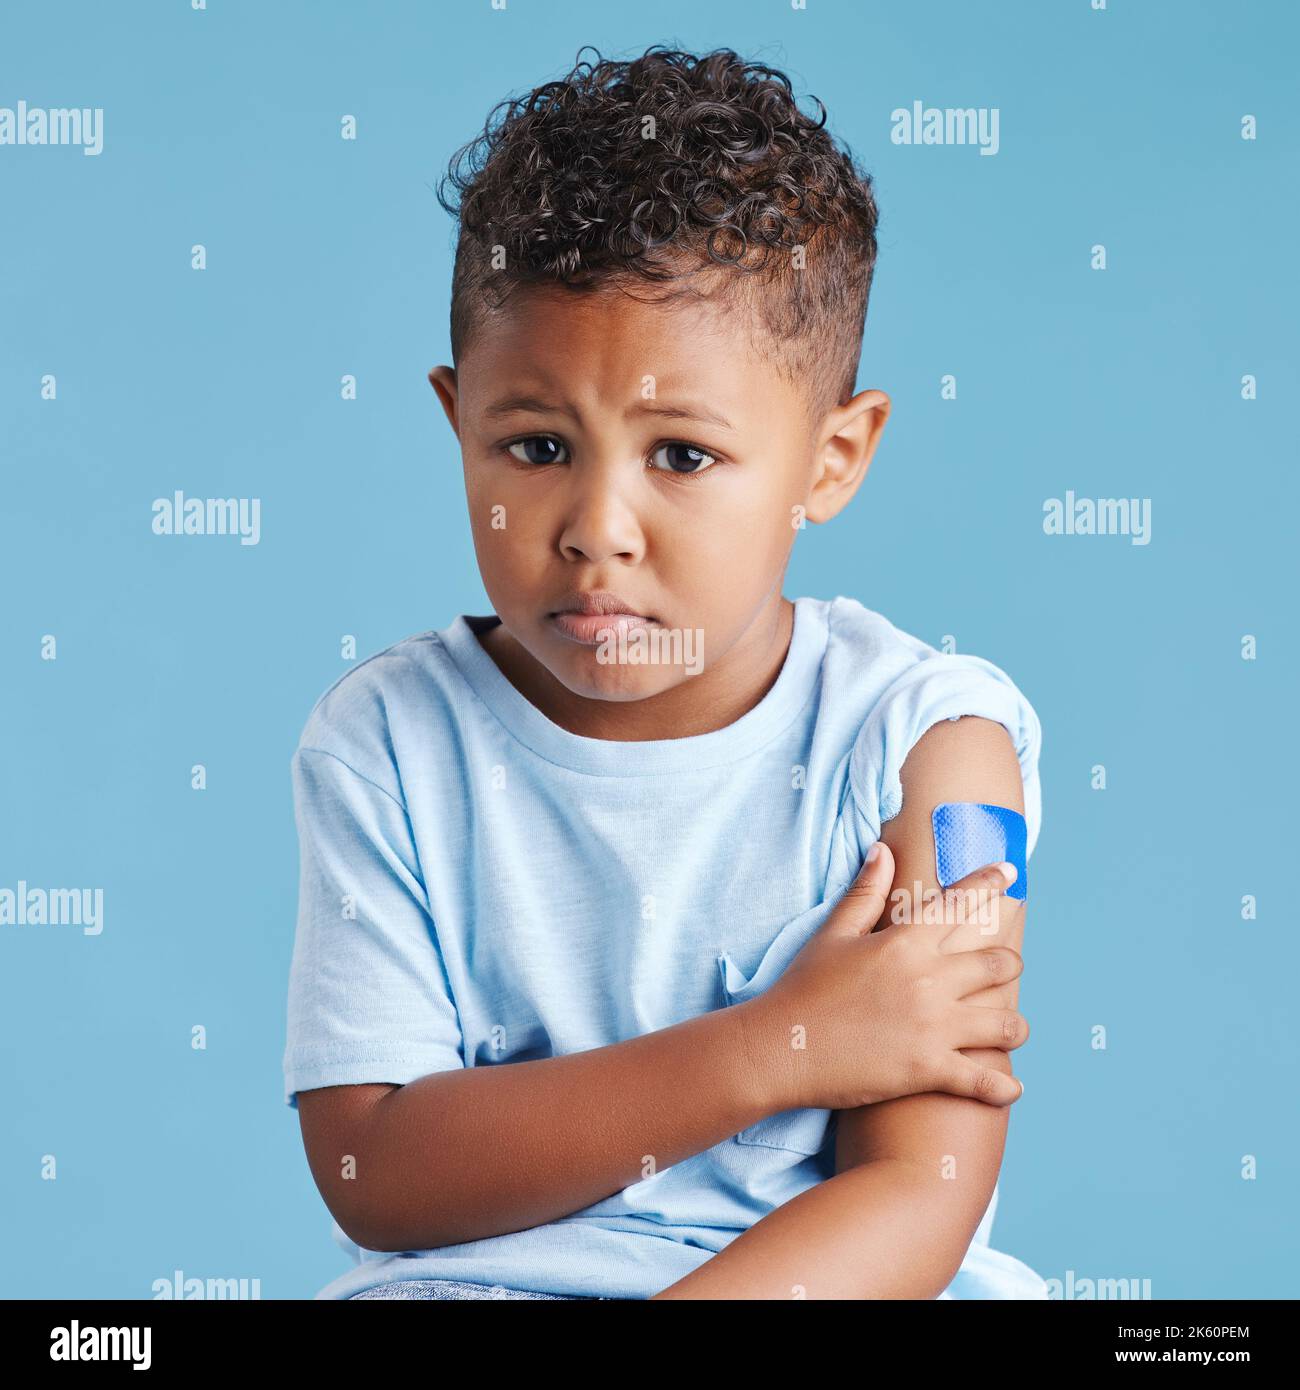 Upset, sad little boy shows vaccinated arm with adhesive bandage after being injected with Covid-19 vaccine, motivates to vaccinate against Stock Photo